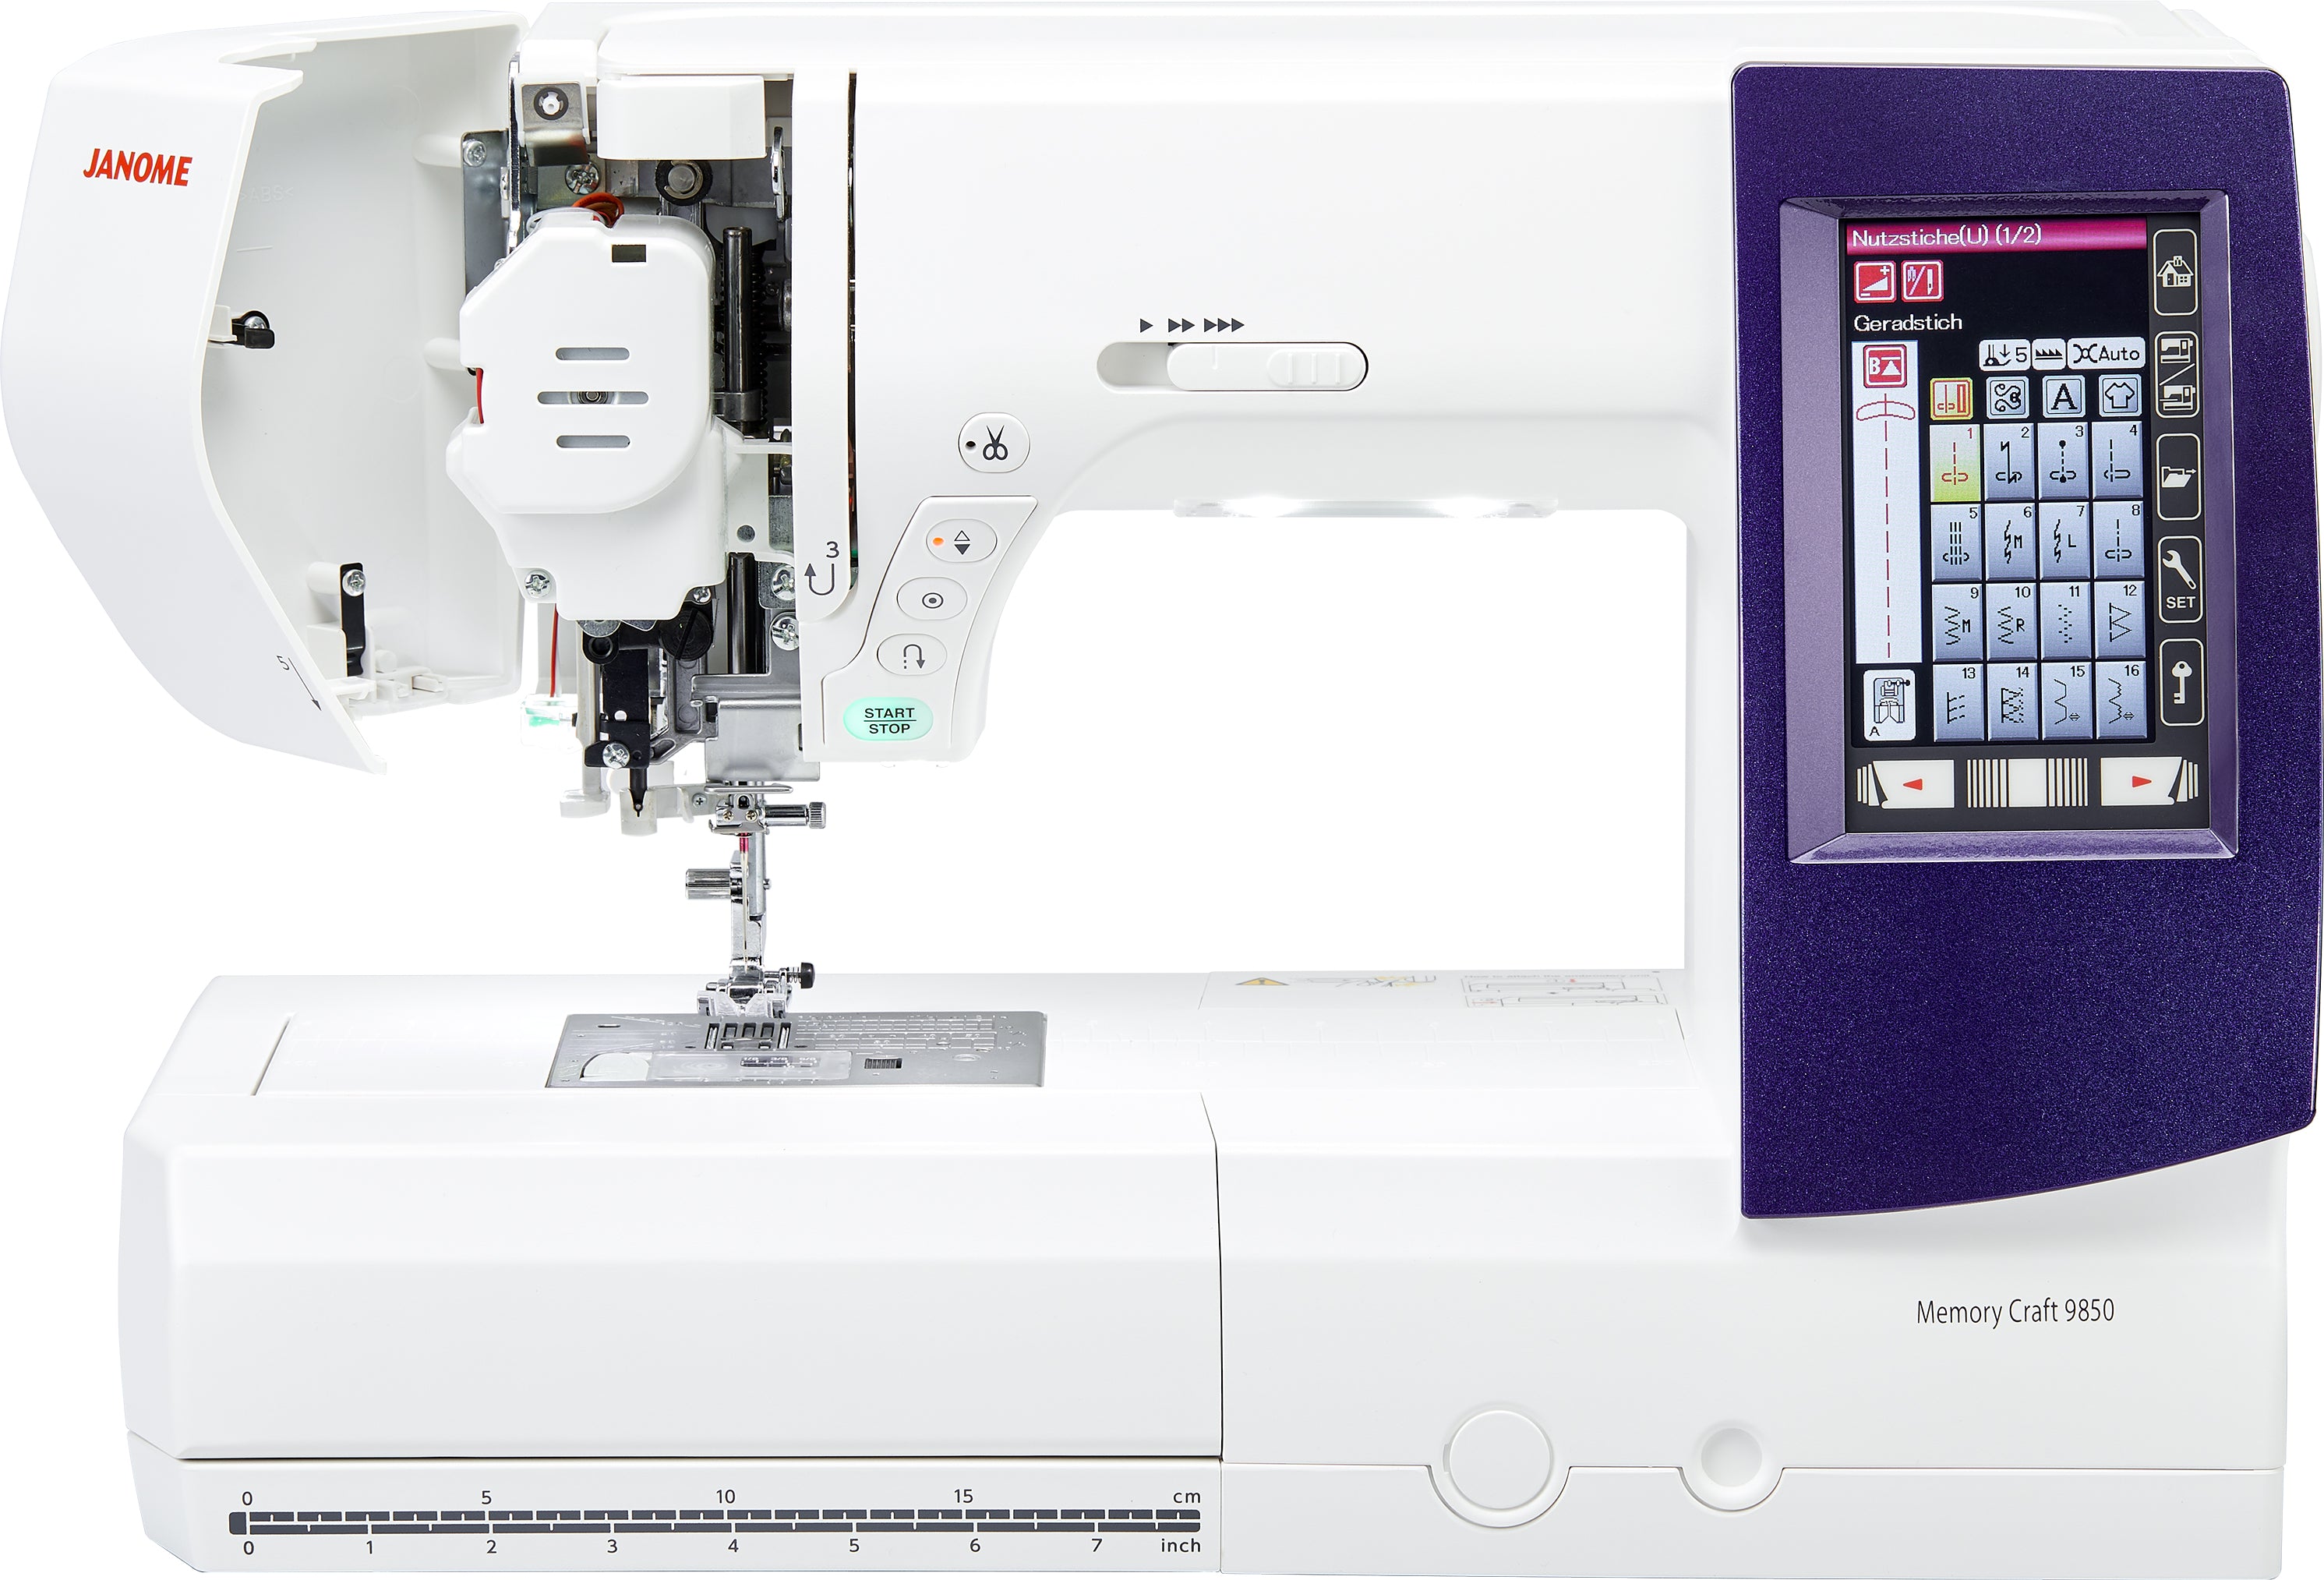 Janome Memory Craft 9850 Sewing and Embroidery Machine for Sale at World Weidner